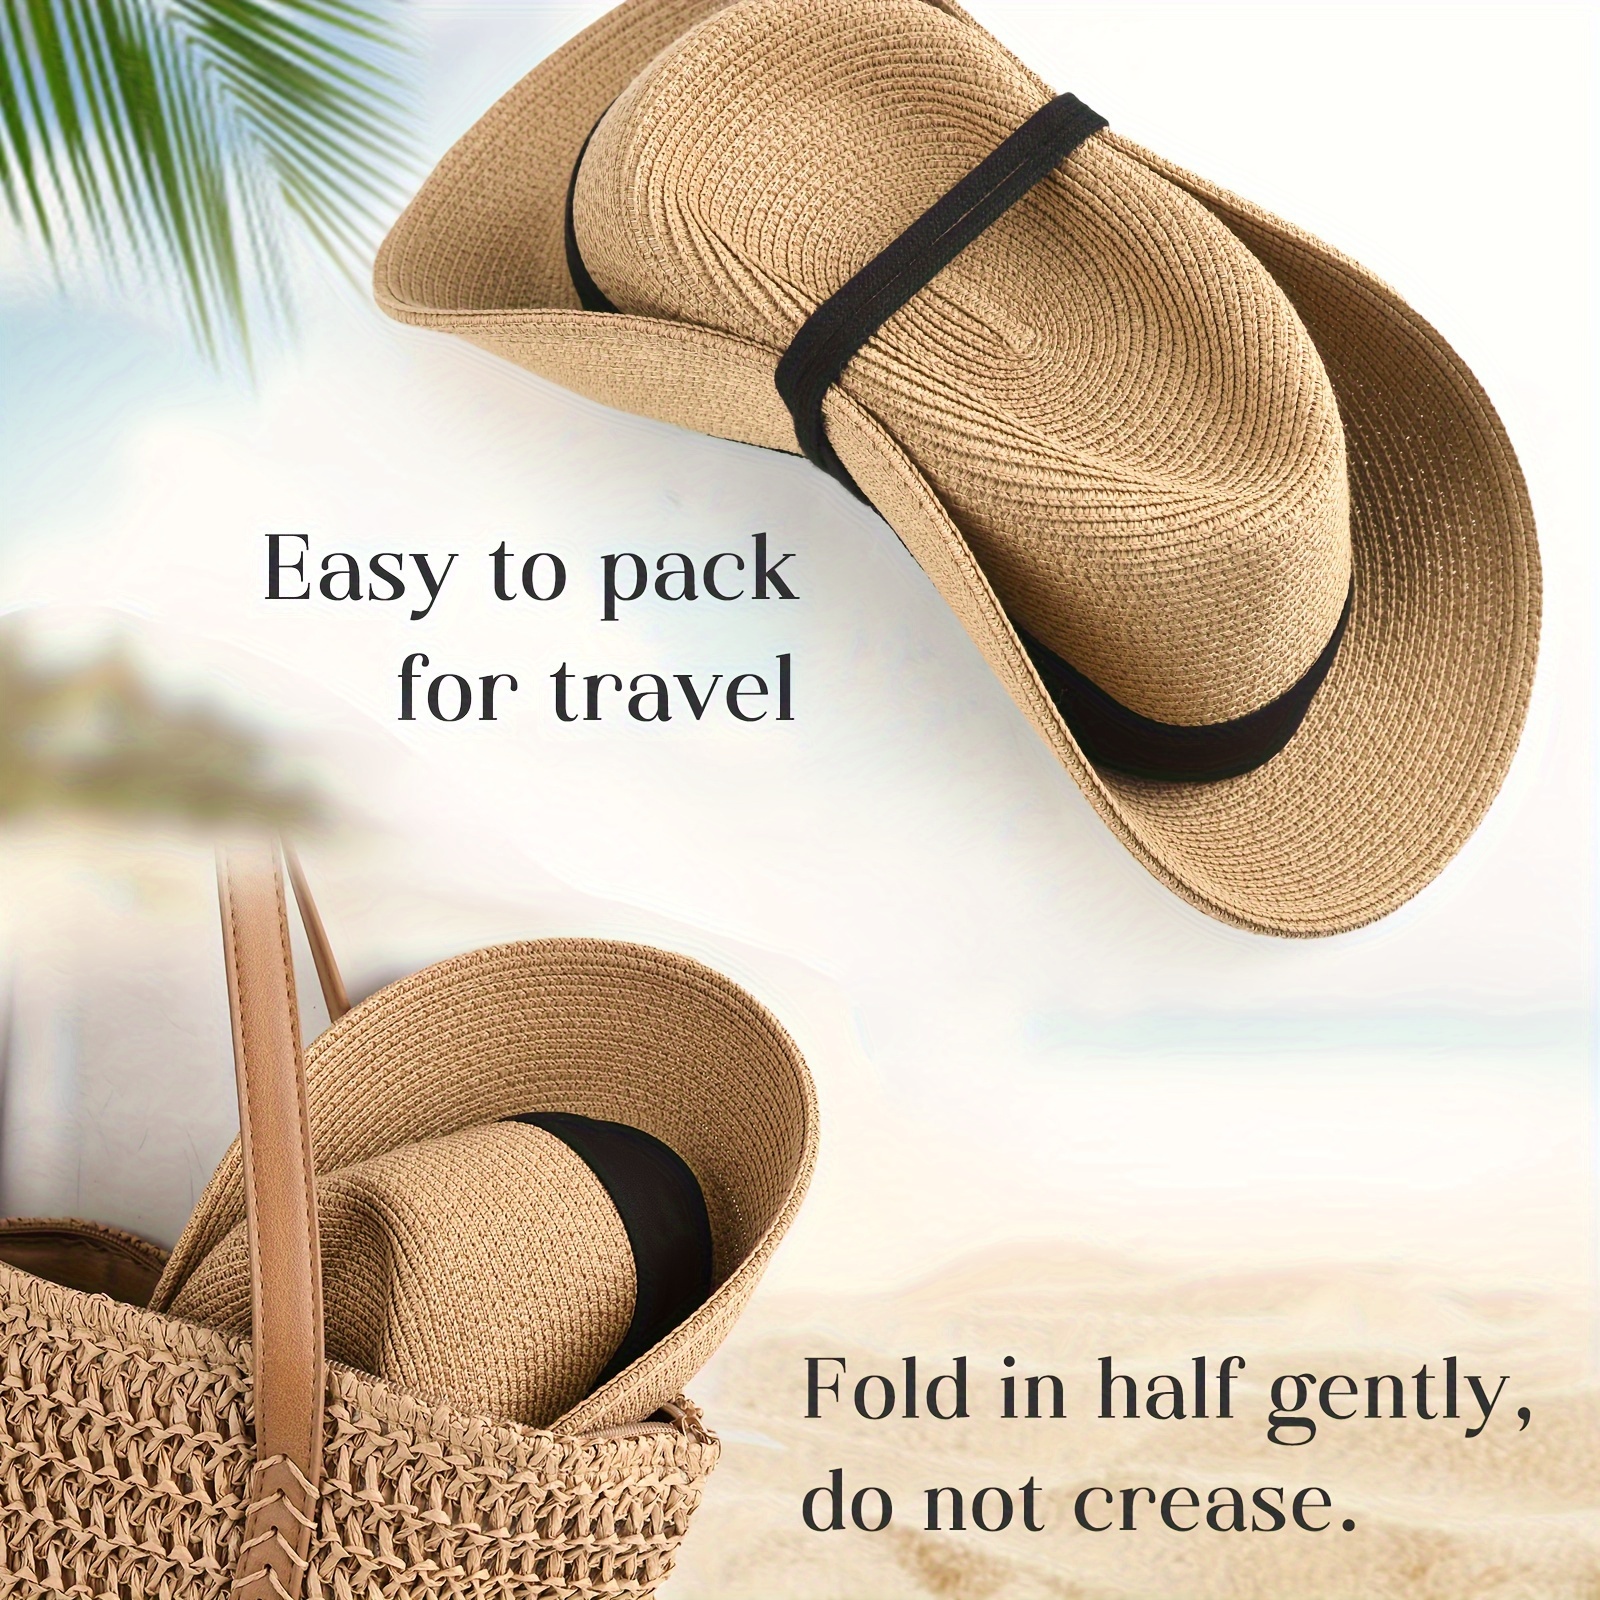 Jazz Panama Wide Brim Straw Hat With Wide Brim For Sun Protection